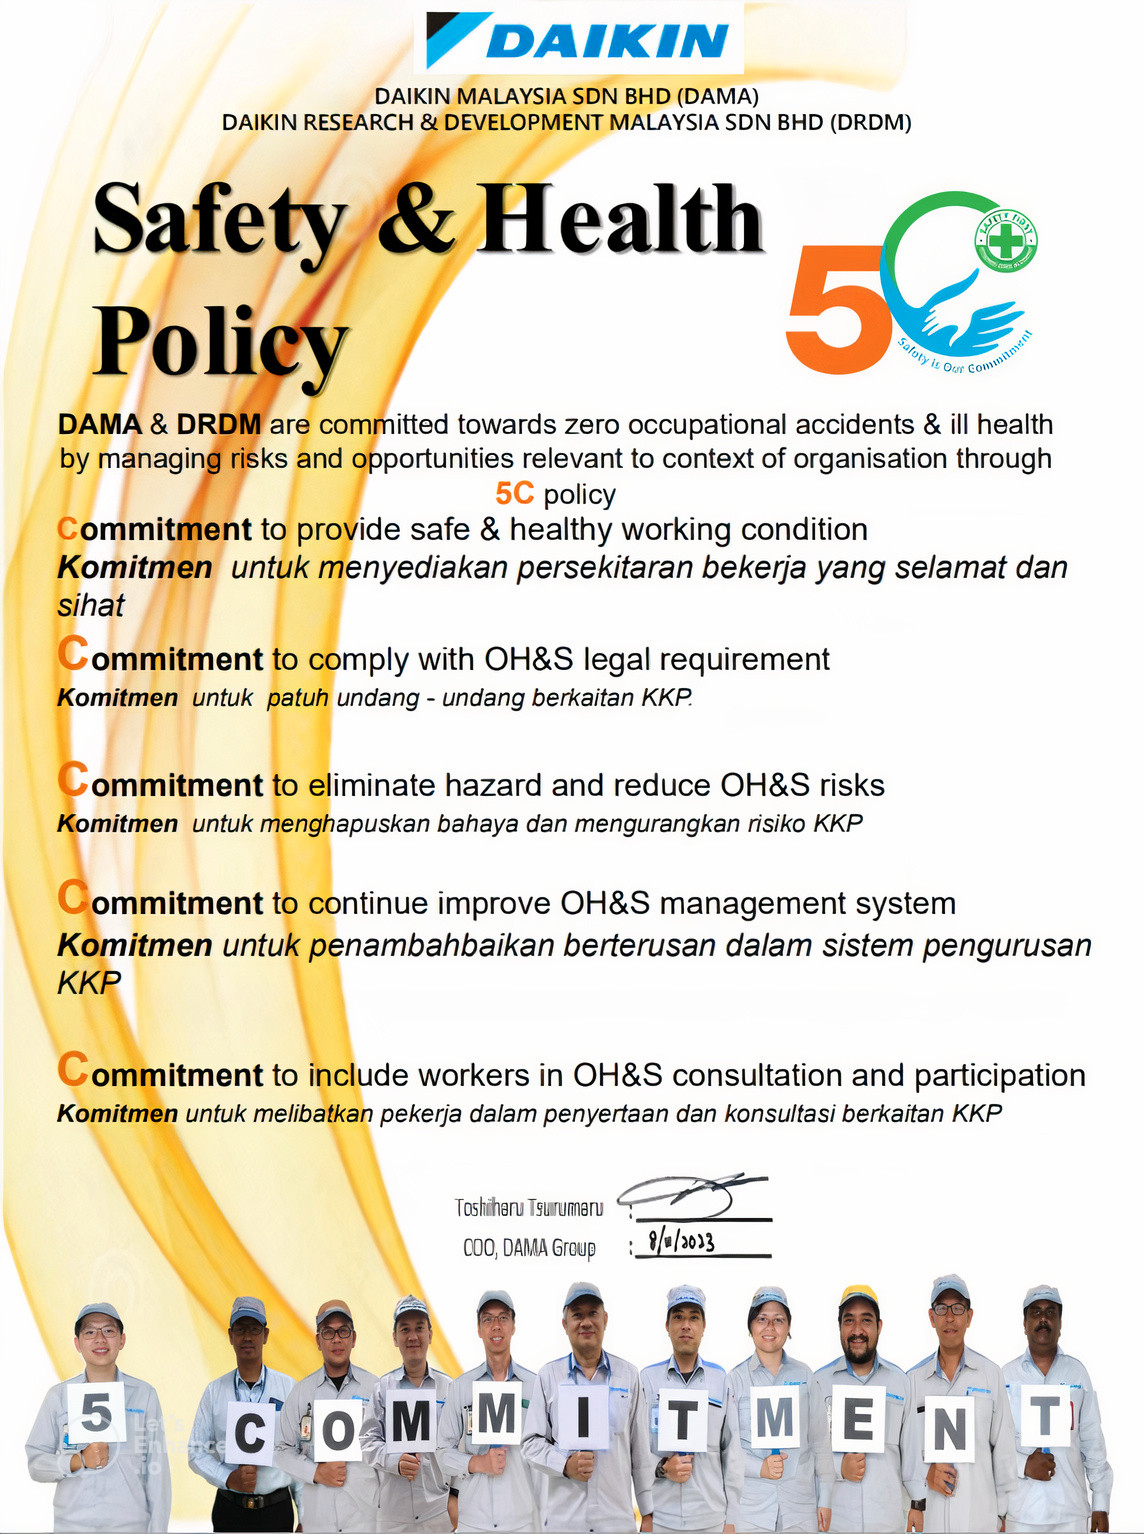 Safety & Health Policy